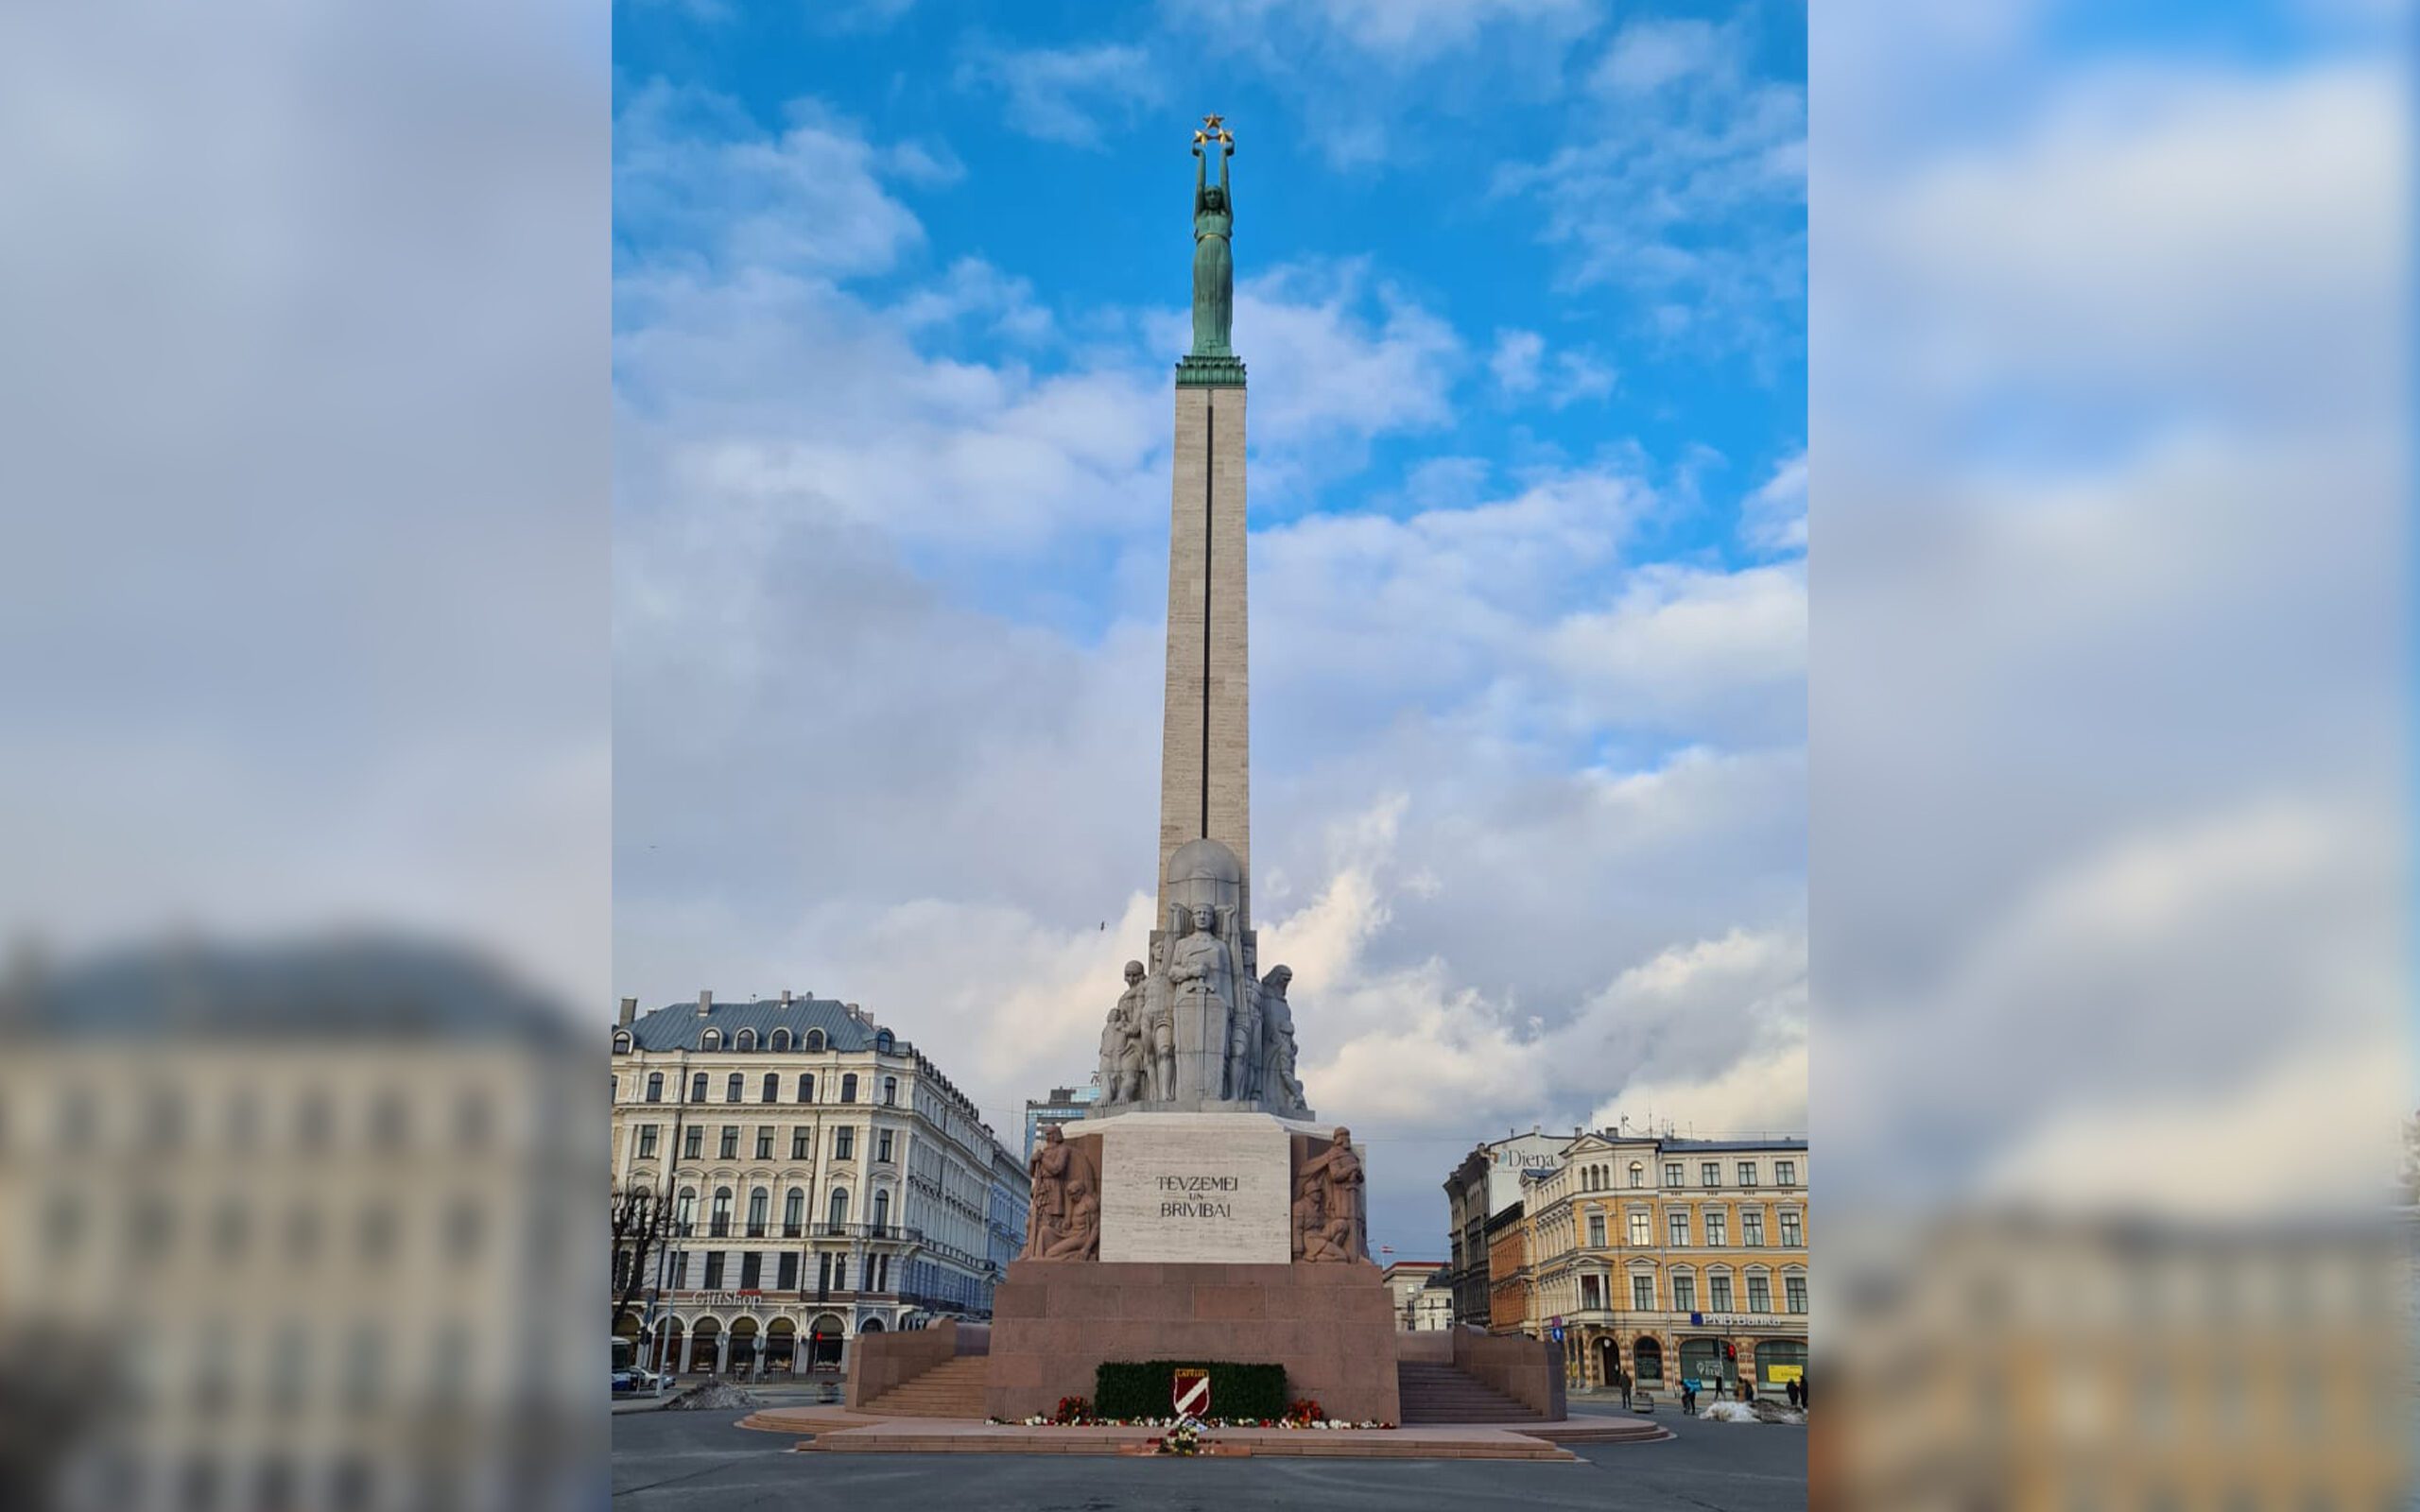 The Freedom Monument in Riga, Latvia honouring soldiers killed during the Latvian War of Independence.